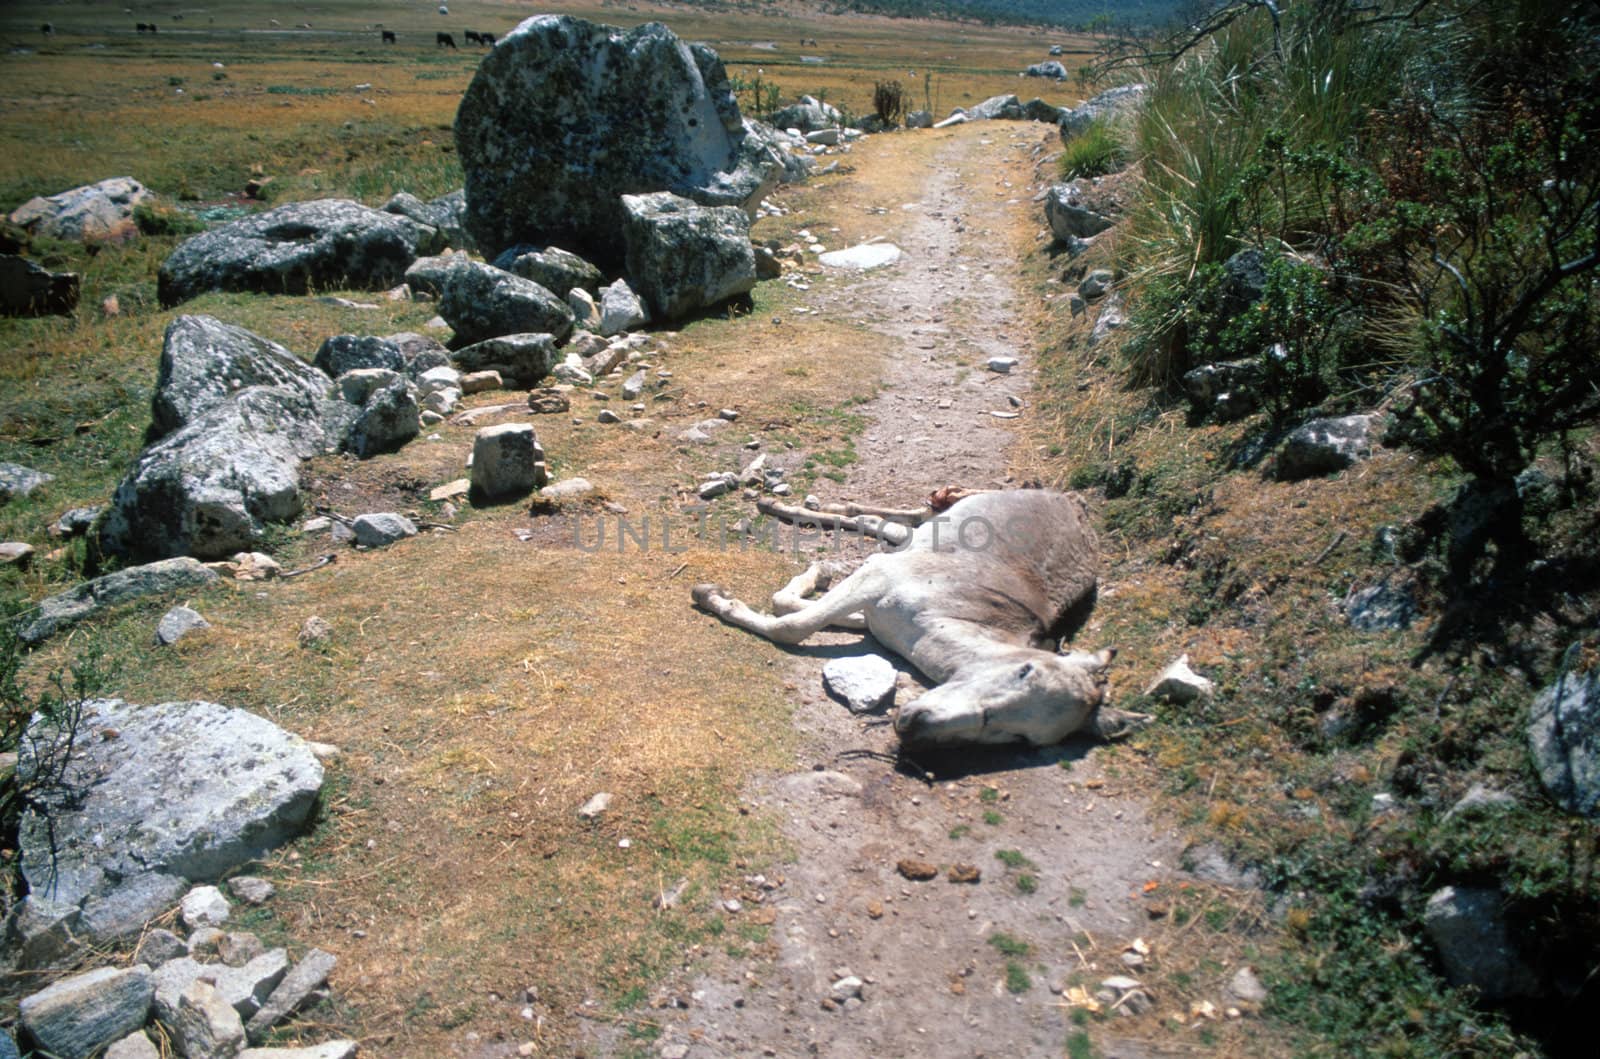 Dead donkey lying down a path on way to Alpayamo base camp, Cordillera Blanca, Peru by RUSSELLIMAGES